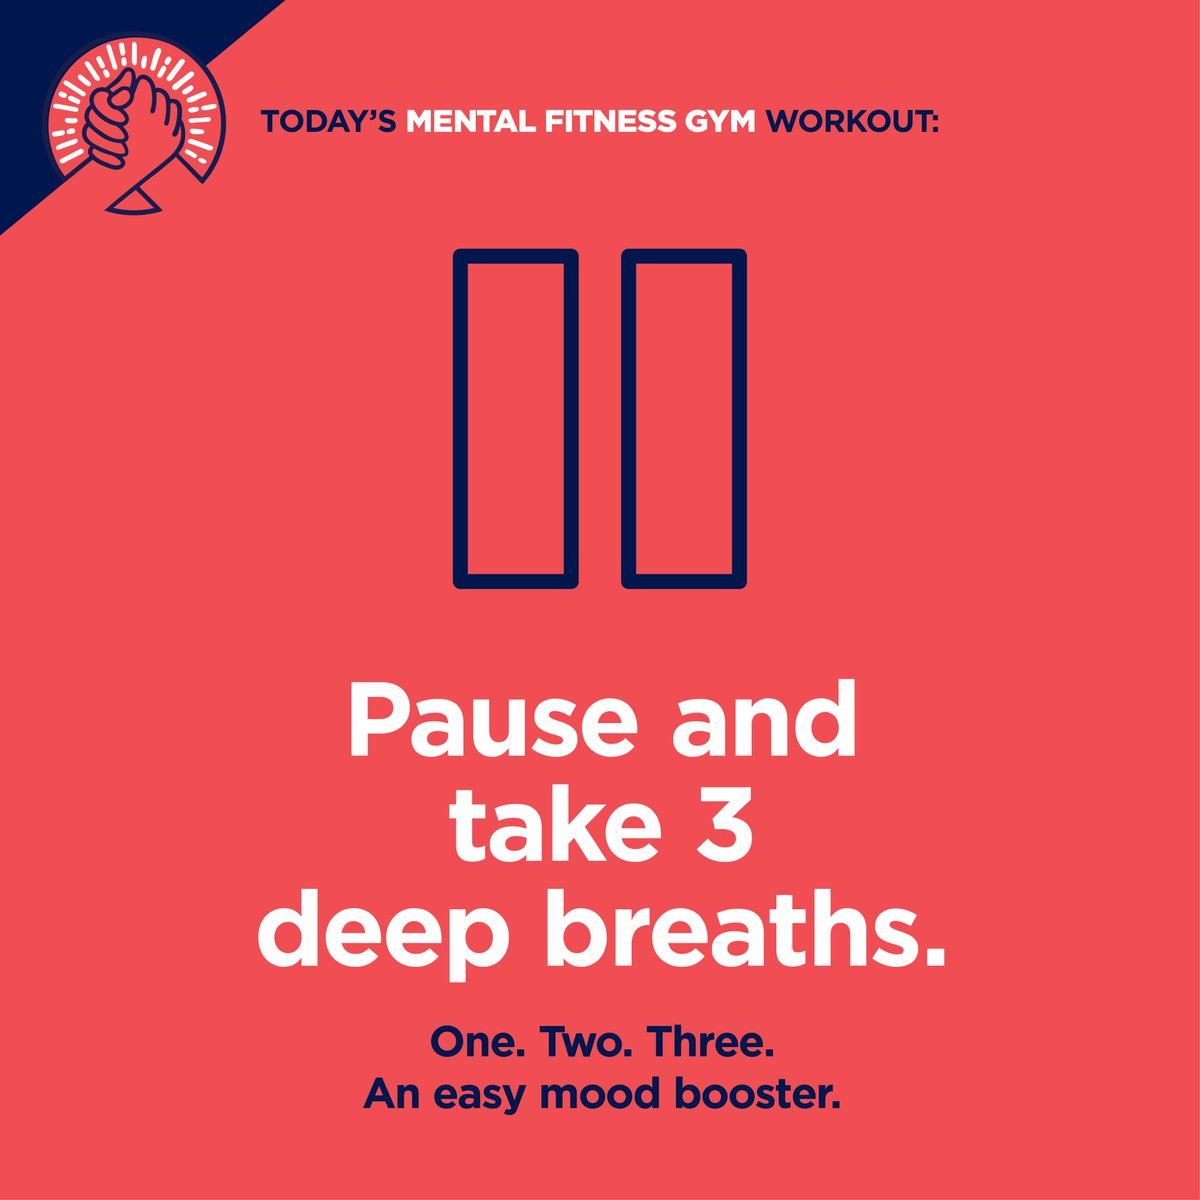 Here’s another simple #mentalfitness exercise to try from @LayneBeachley’s Mood Booster Mental Fitness Moment - easy techniques to get you back on track after having one of ‘those’ days. Discover this and more workouts at thementalfitnessgym.org #mentalfitnessgym #gotcha4life